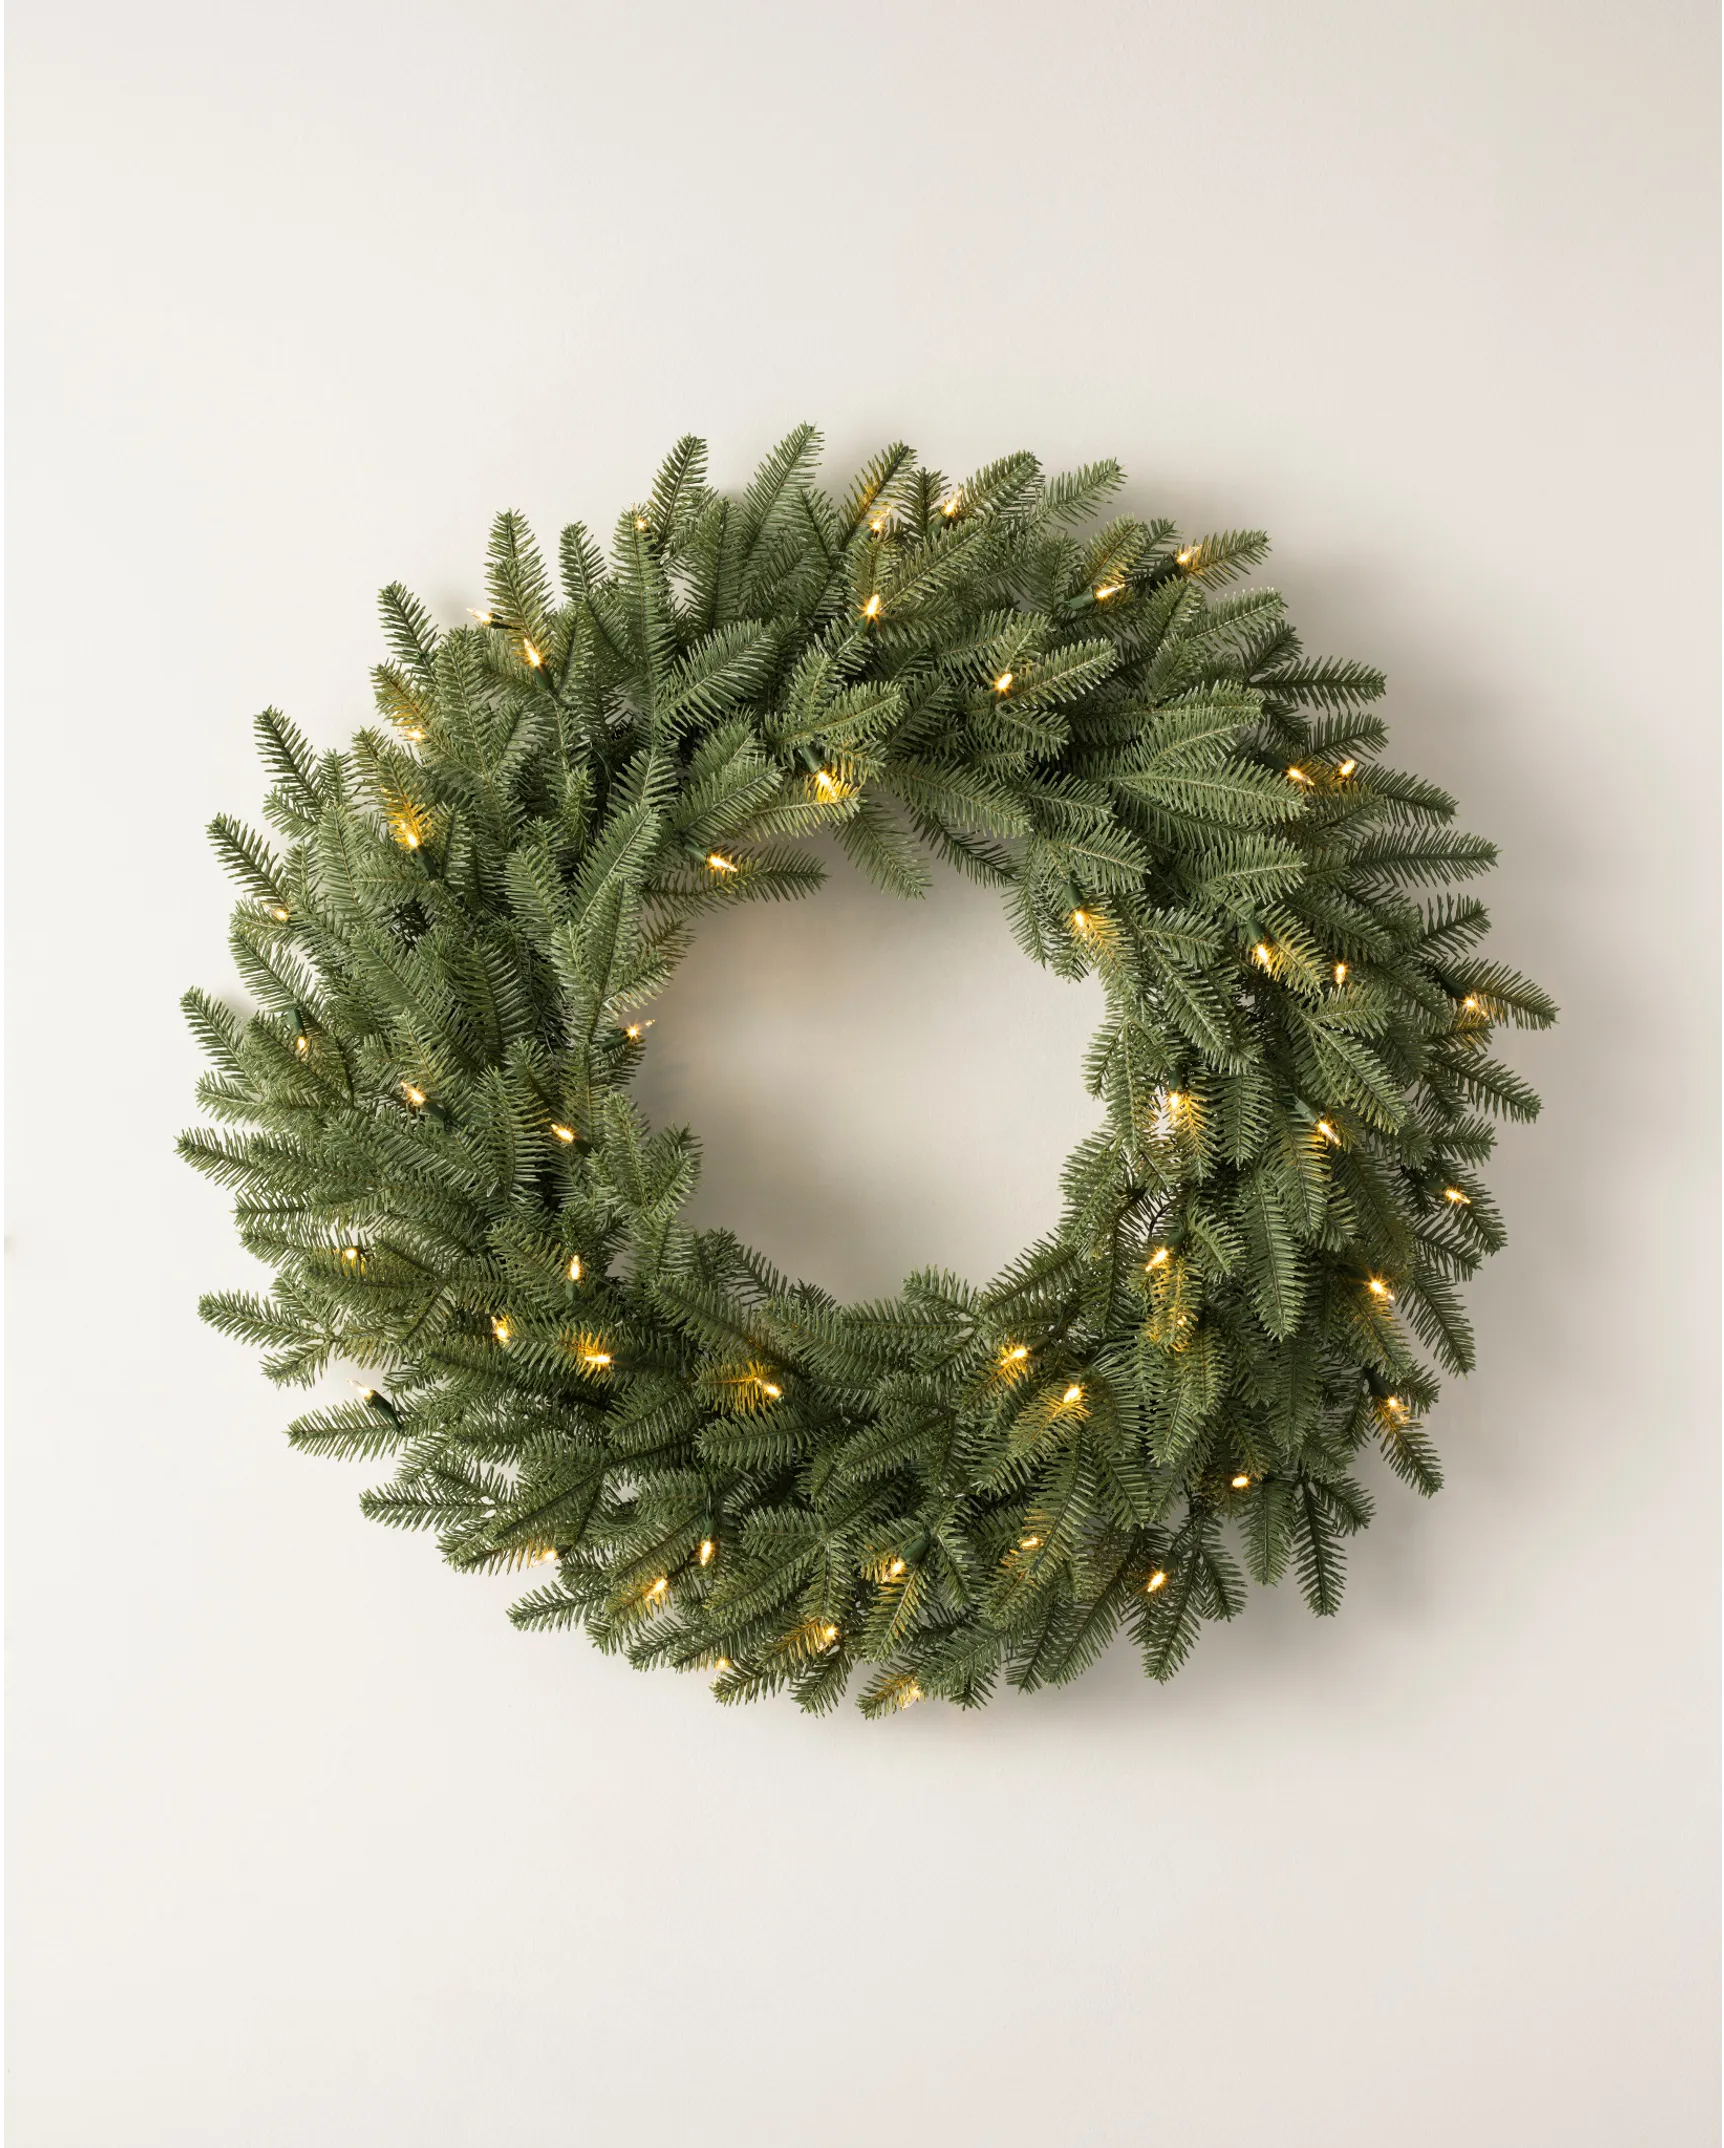  Simplify 24 Inch Wreath Bags, 2 Pack